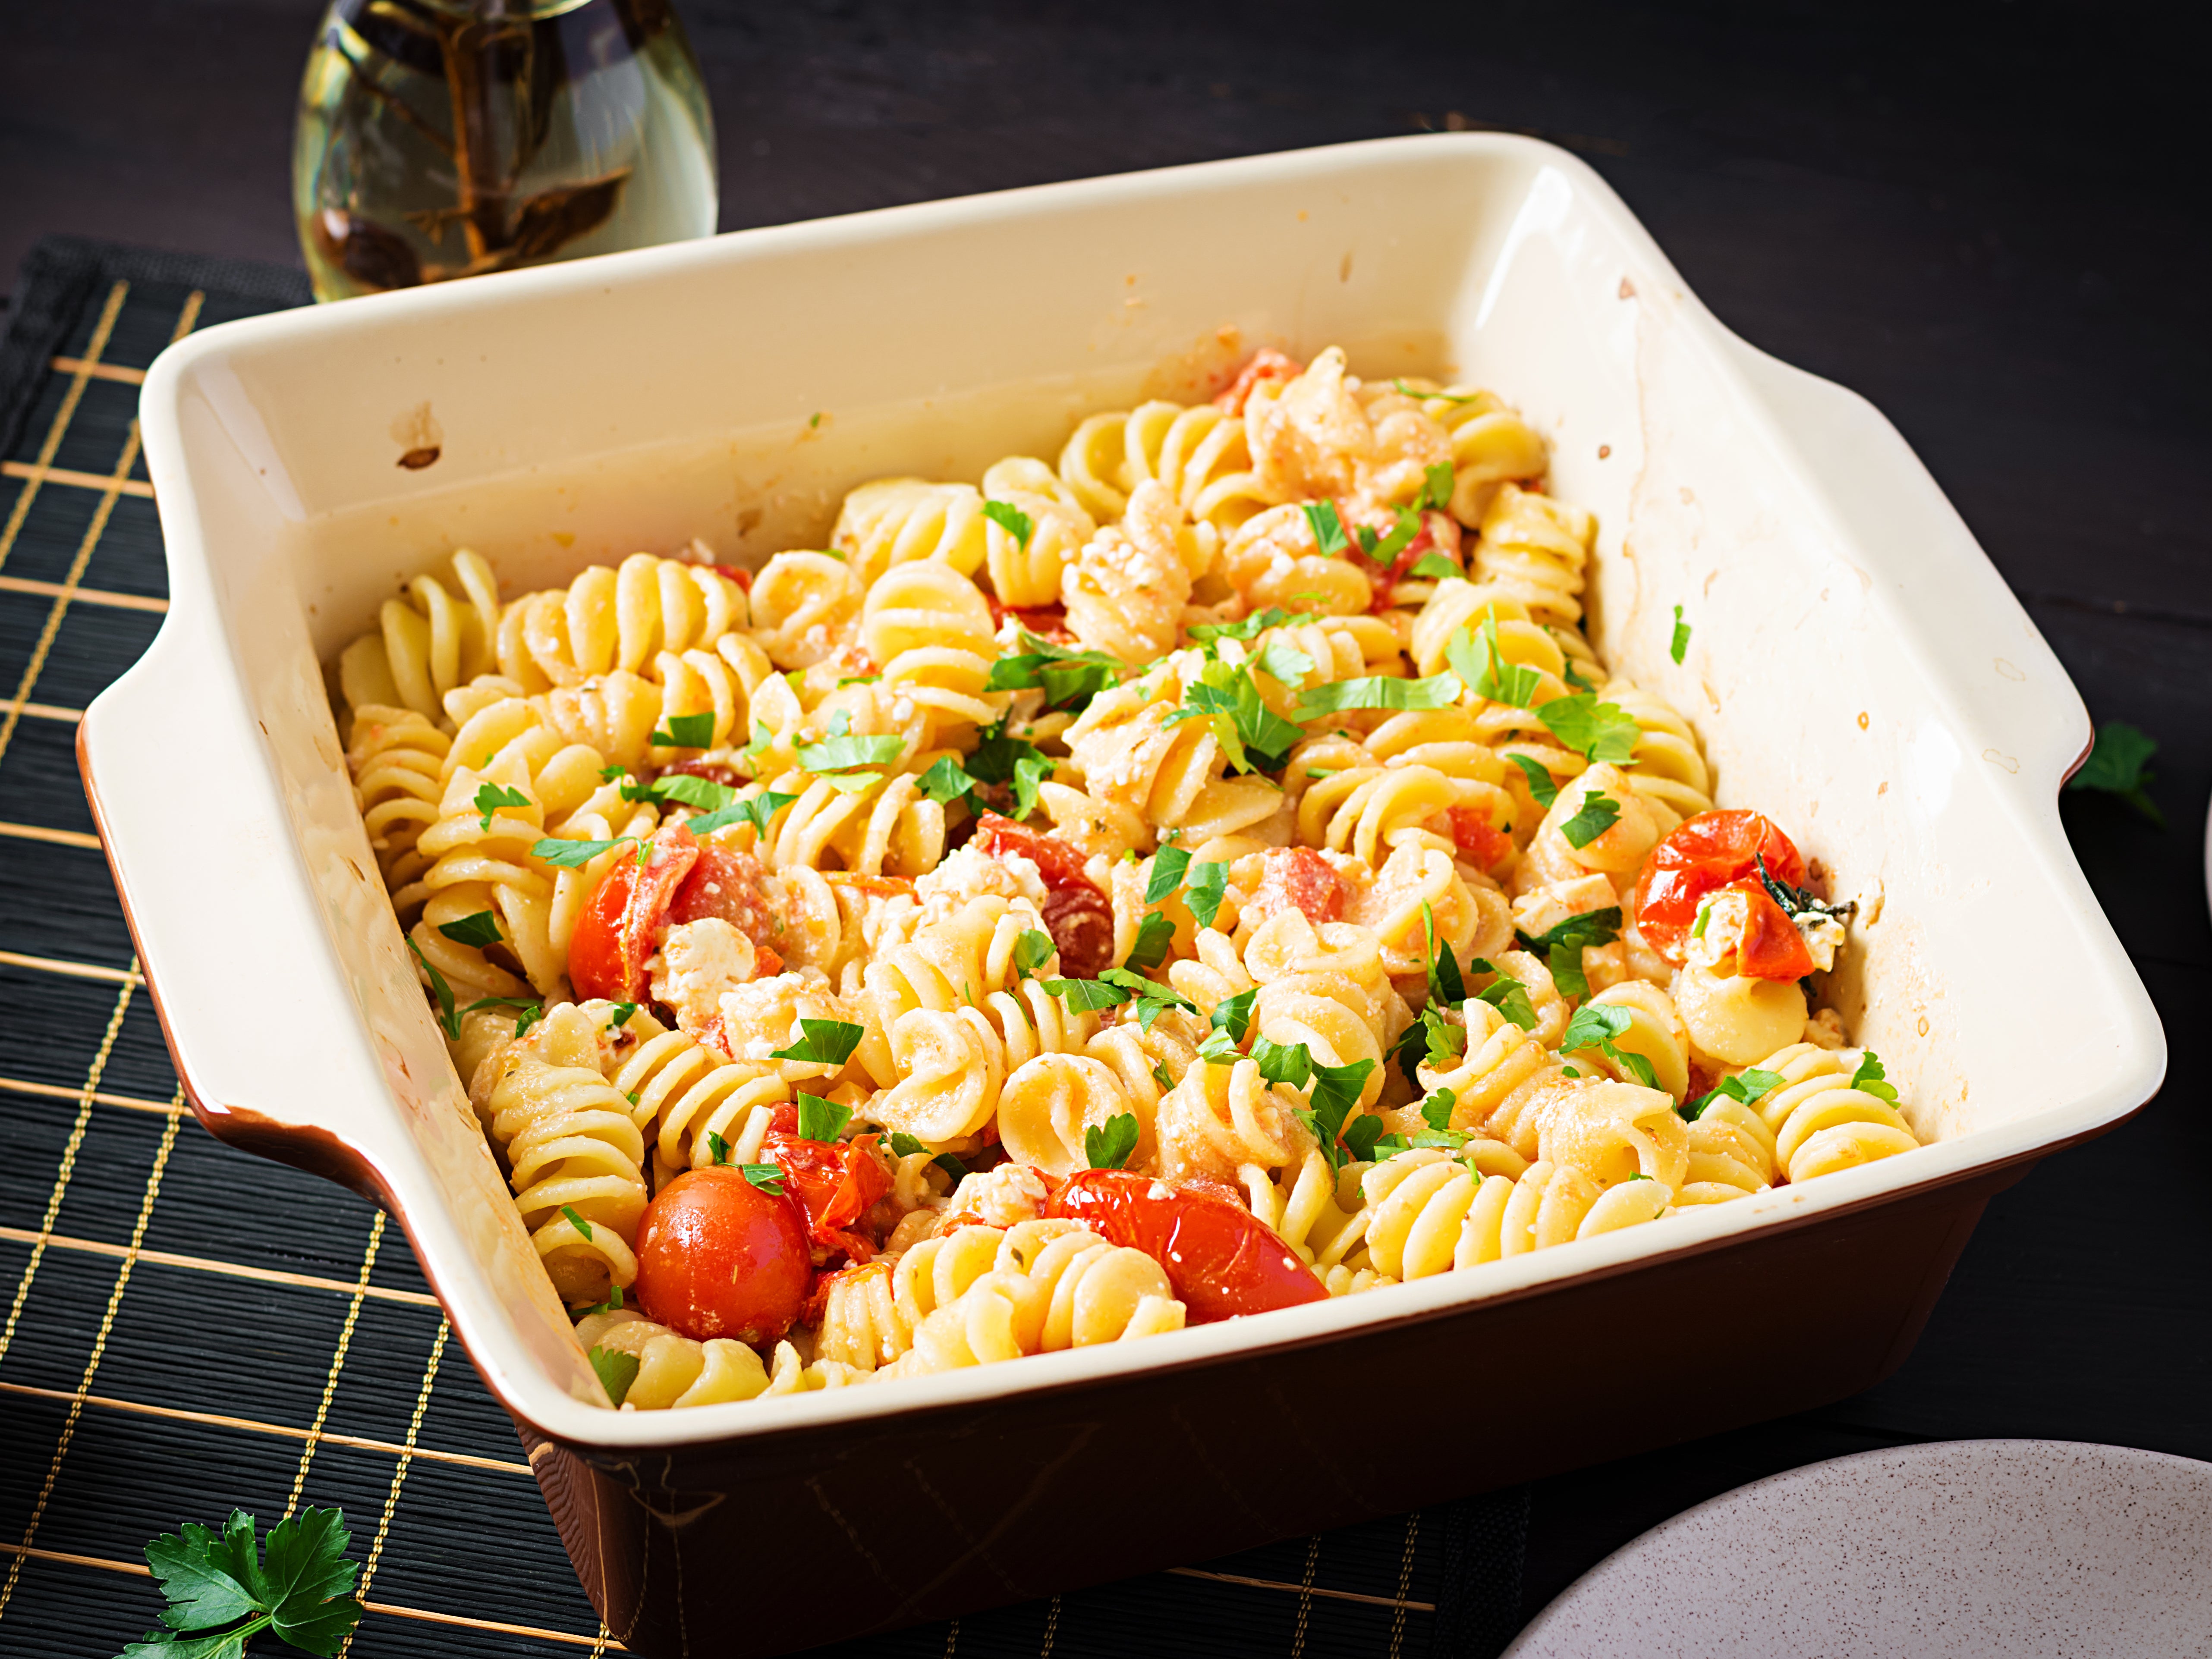 Streamline the cult recipe by chucking everything, including the pasta, together in one pot to bake in the oven